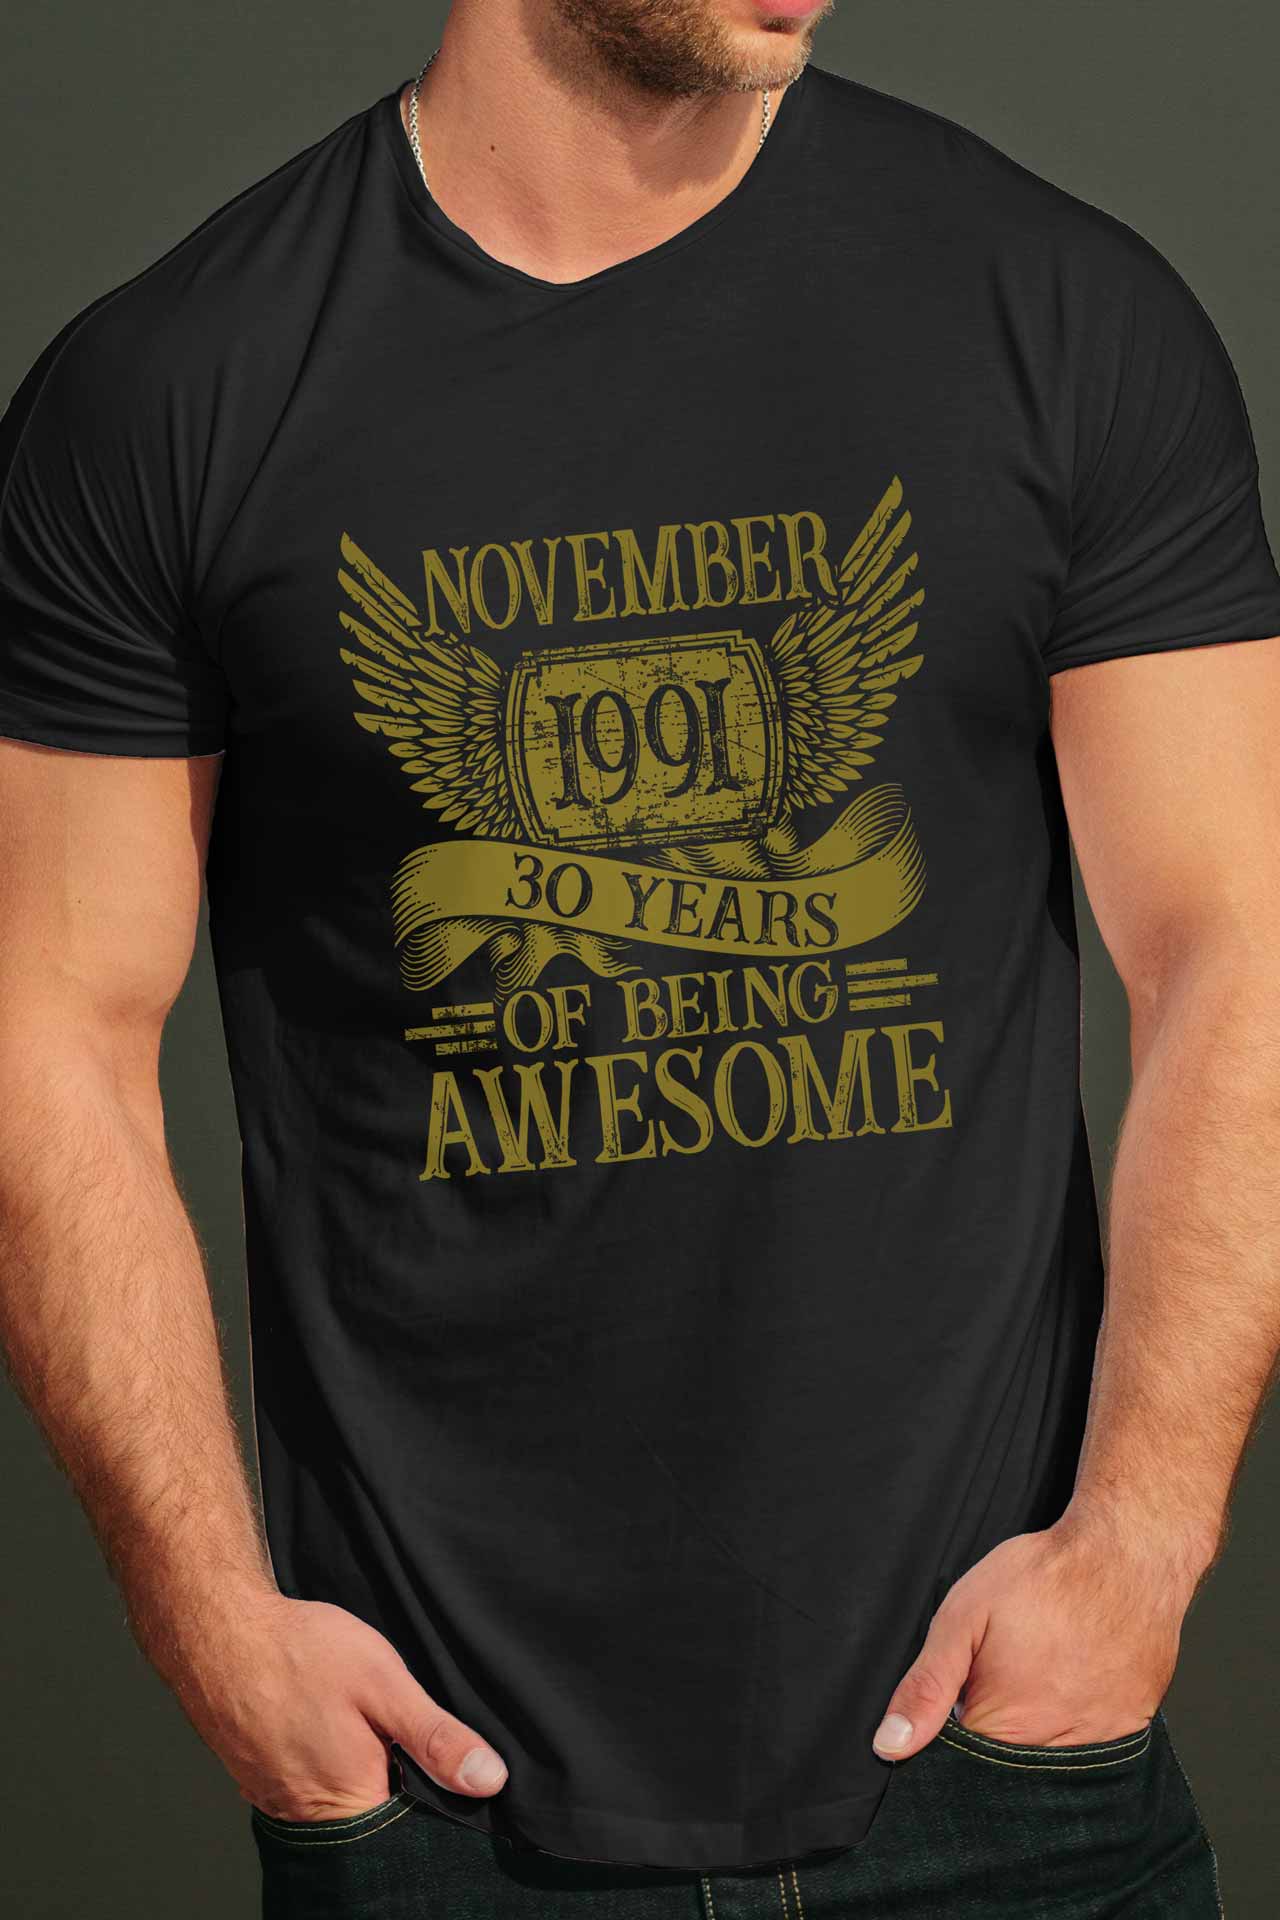 Awesome years- for a birthday with a month and a year to order - a T-shirt, blouse or sweatshirt-liratech.eu